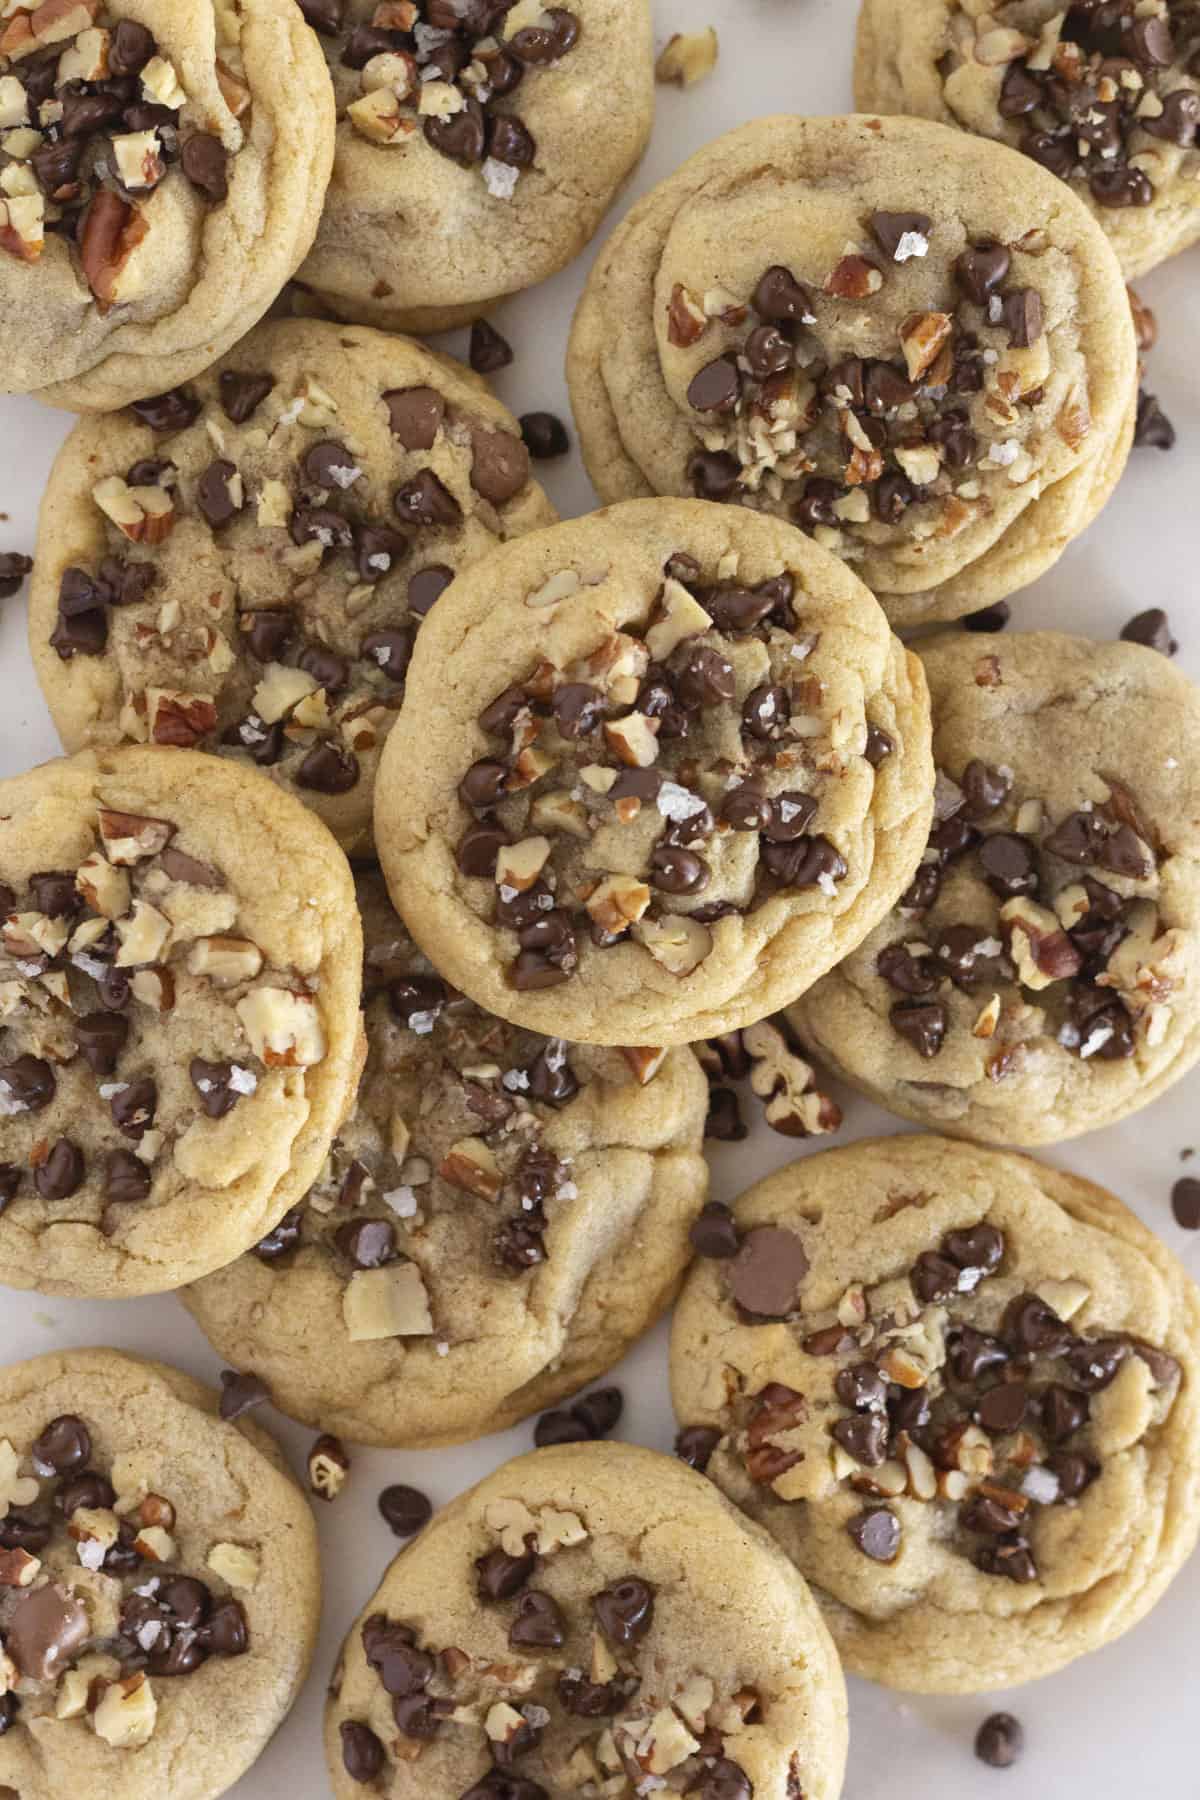 A dozen chocolate chip and pecan cookies on a white tray.